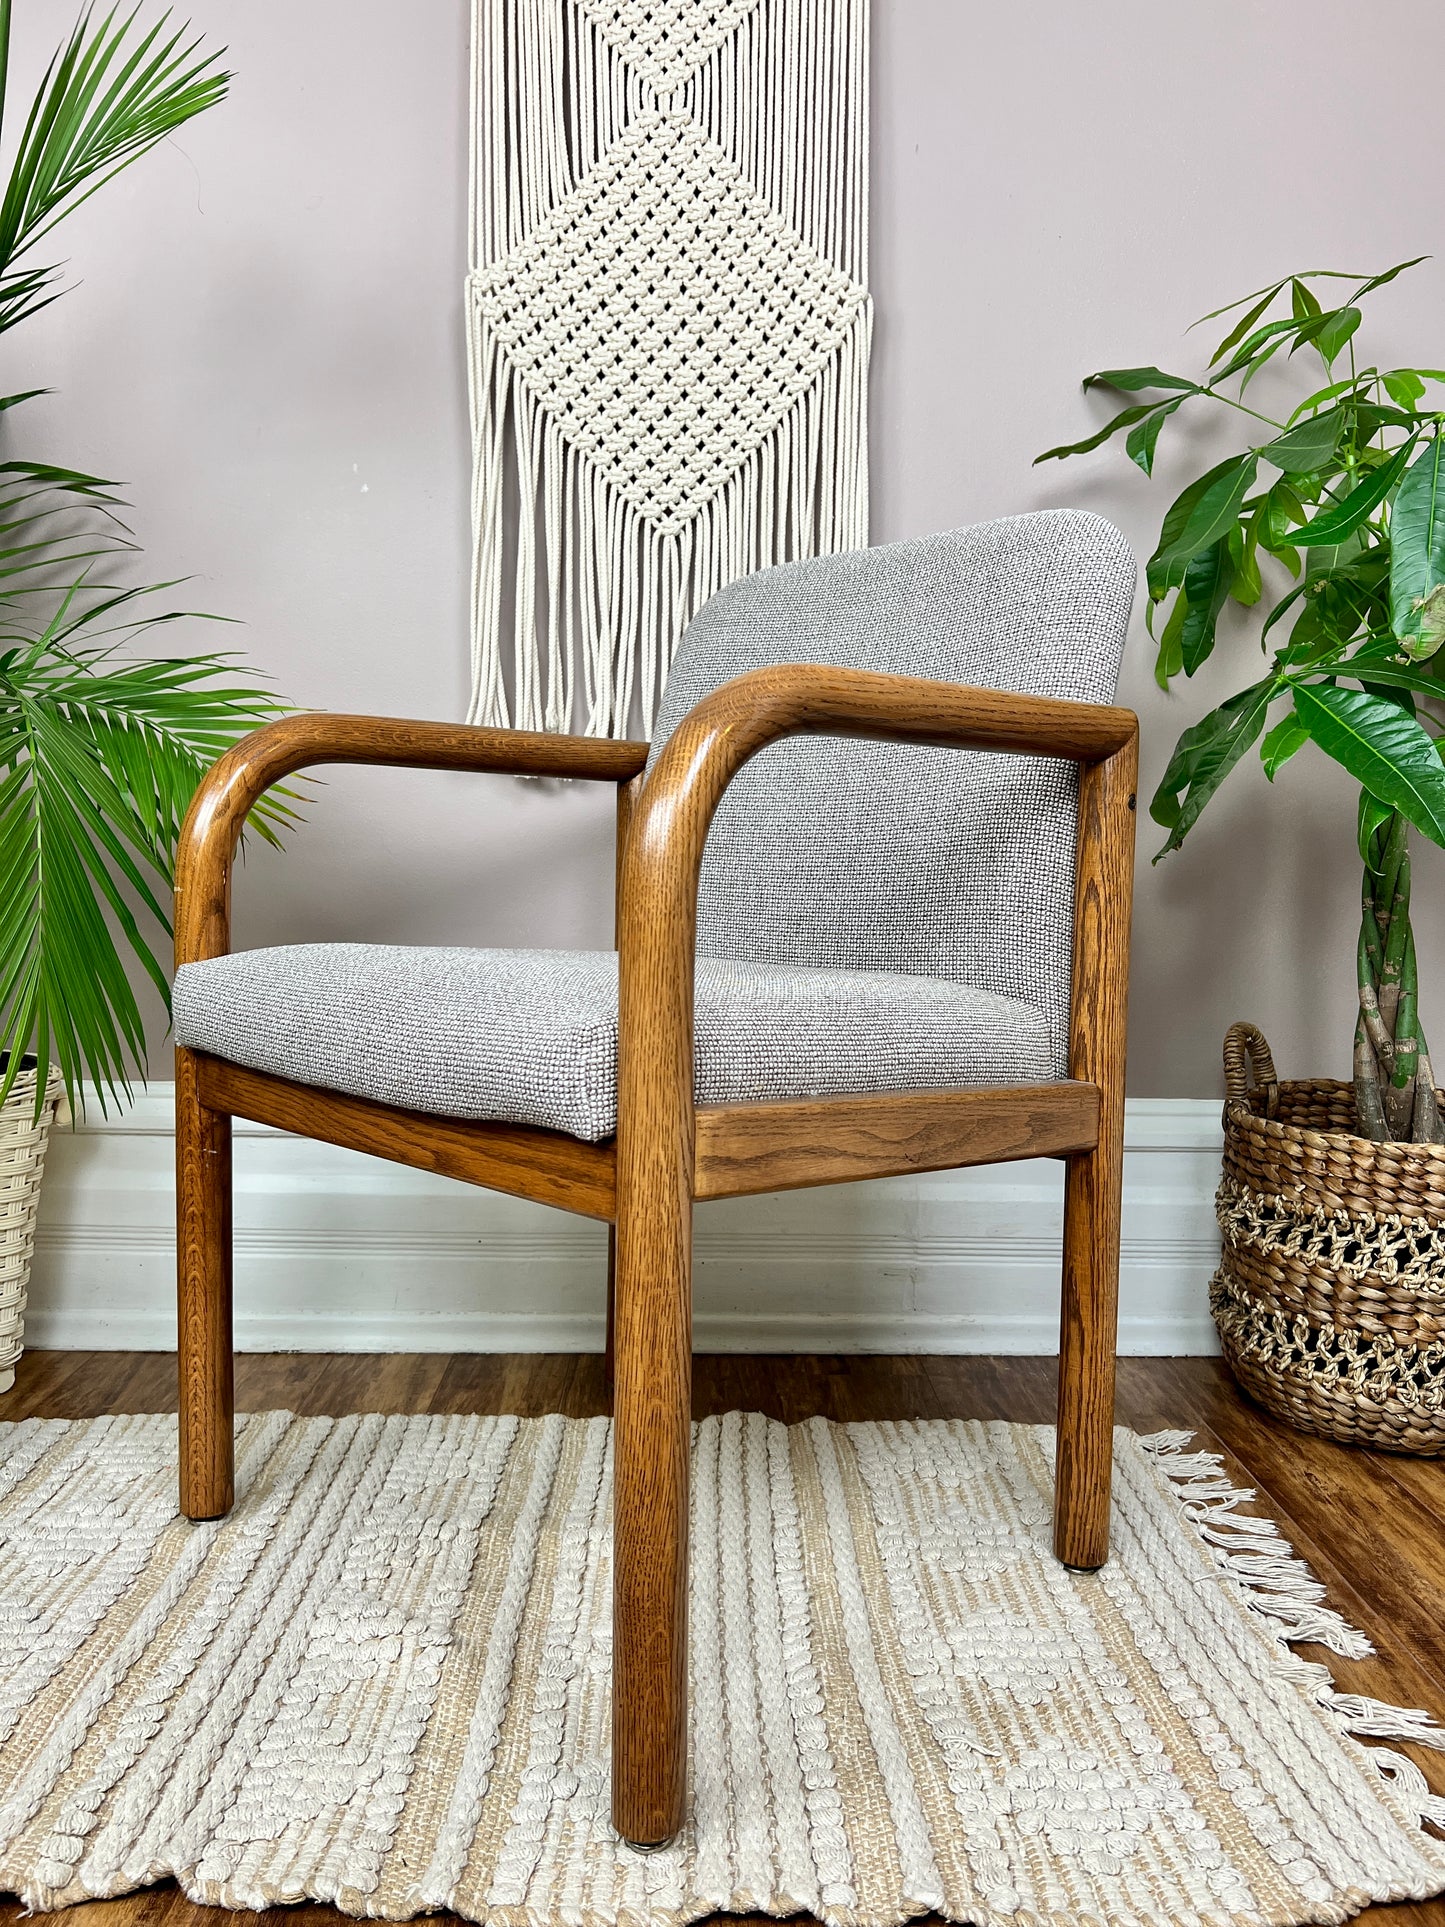 The Oslo Bentwood Chairs(Only 1 left!)